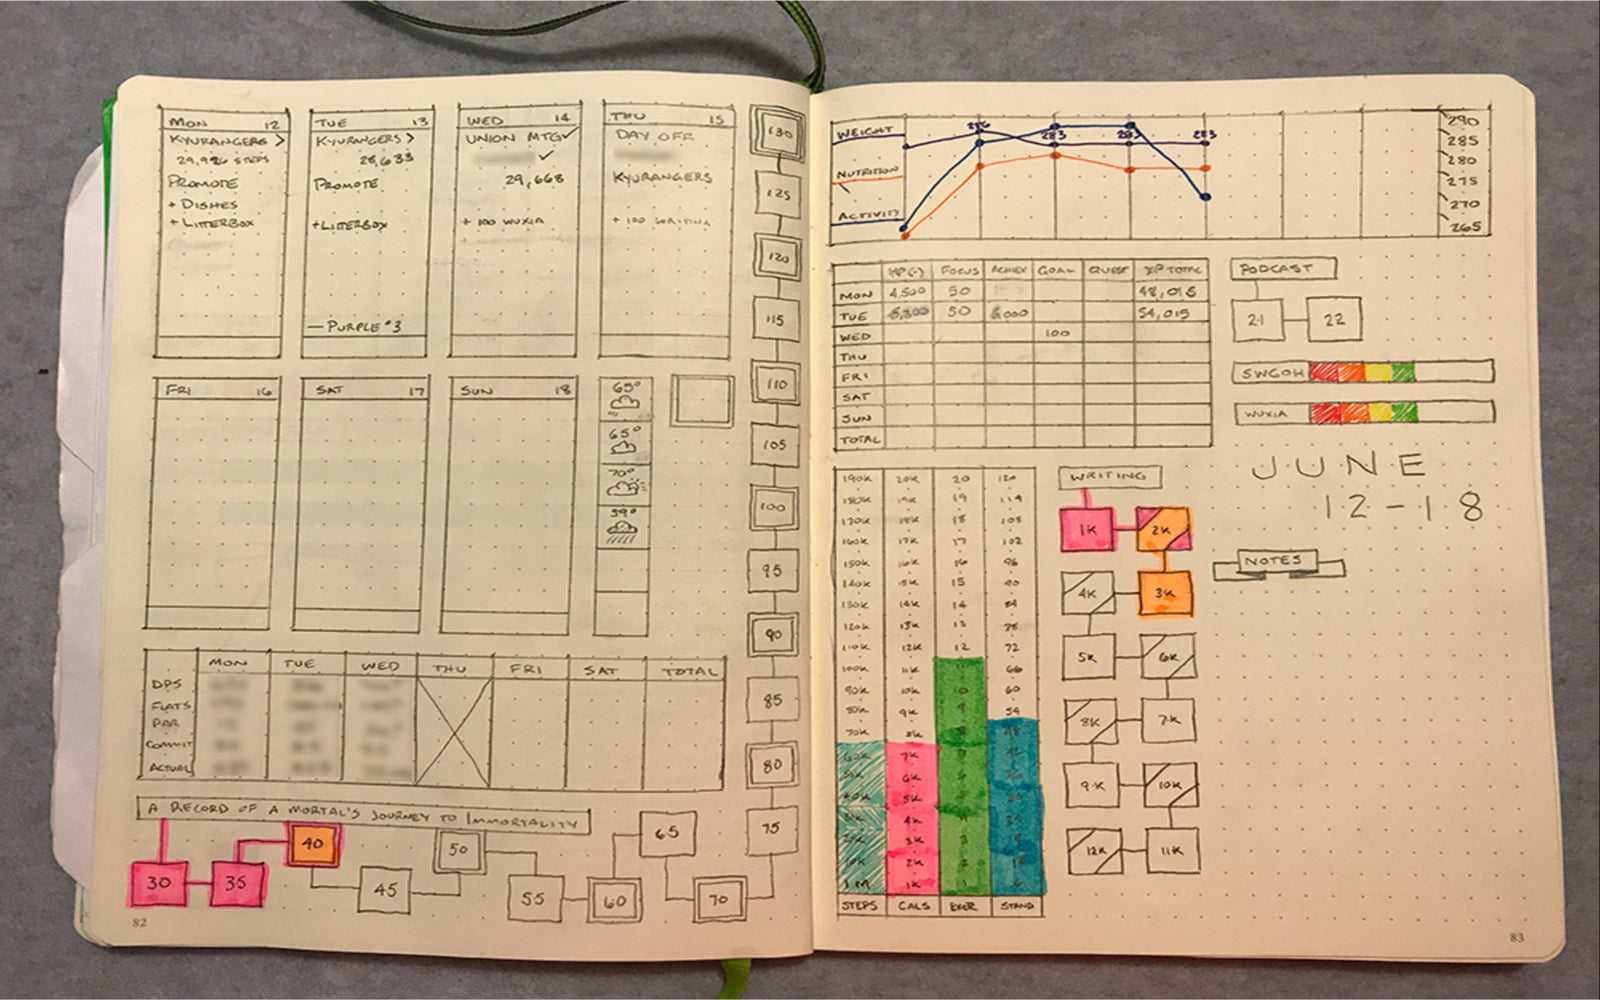 Gamify Your Life With a BuJo RPG